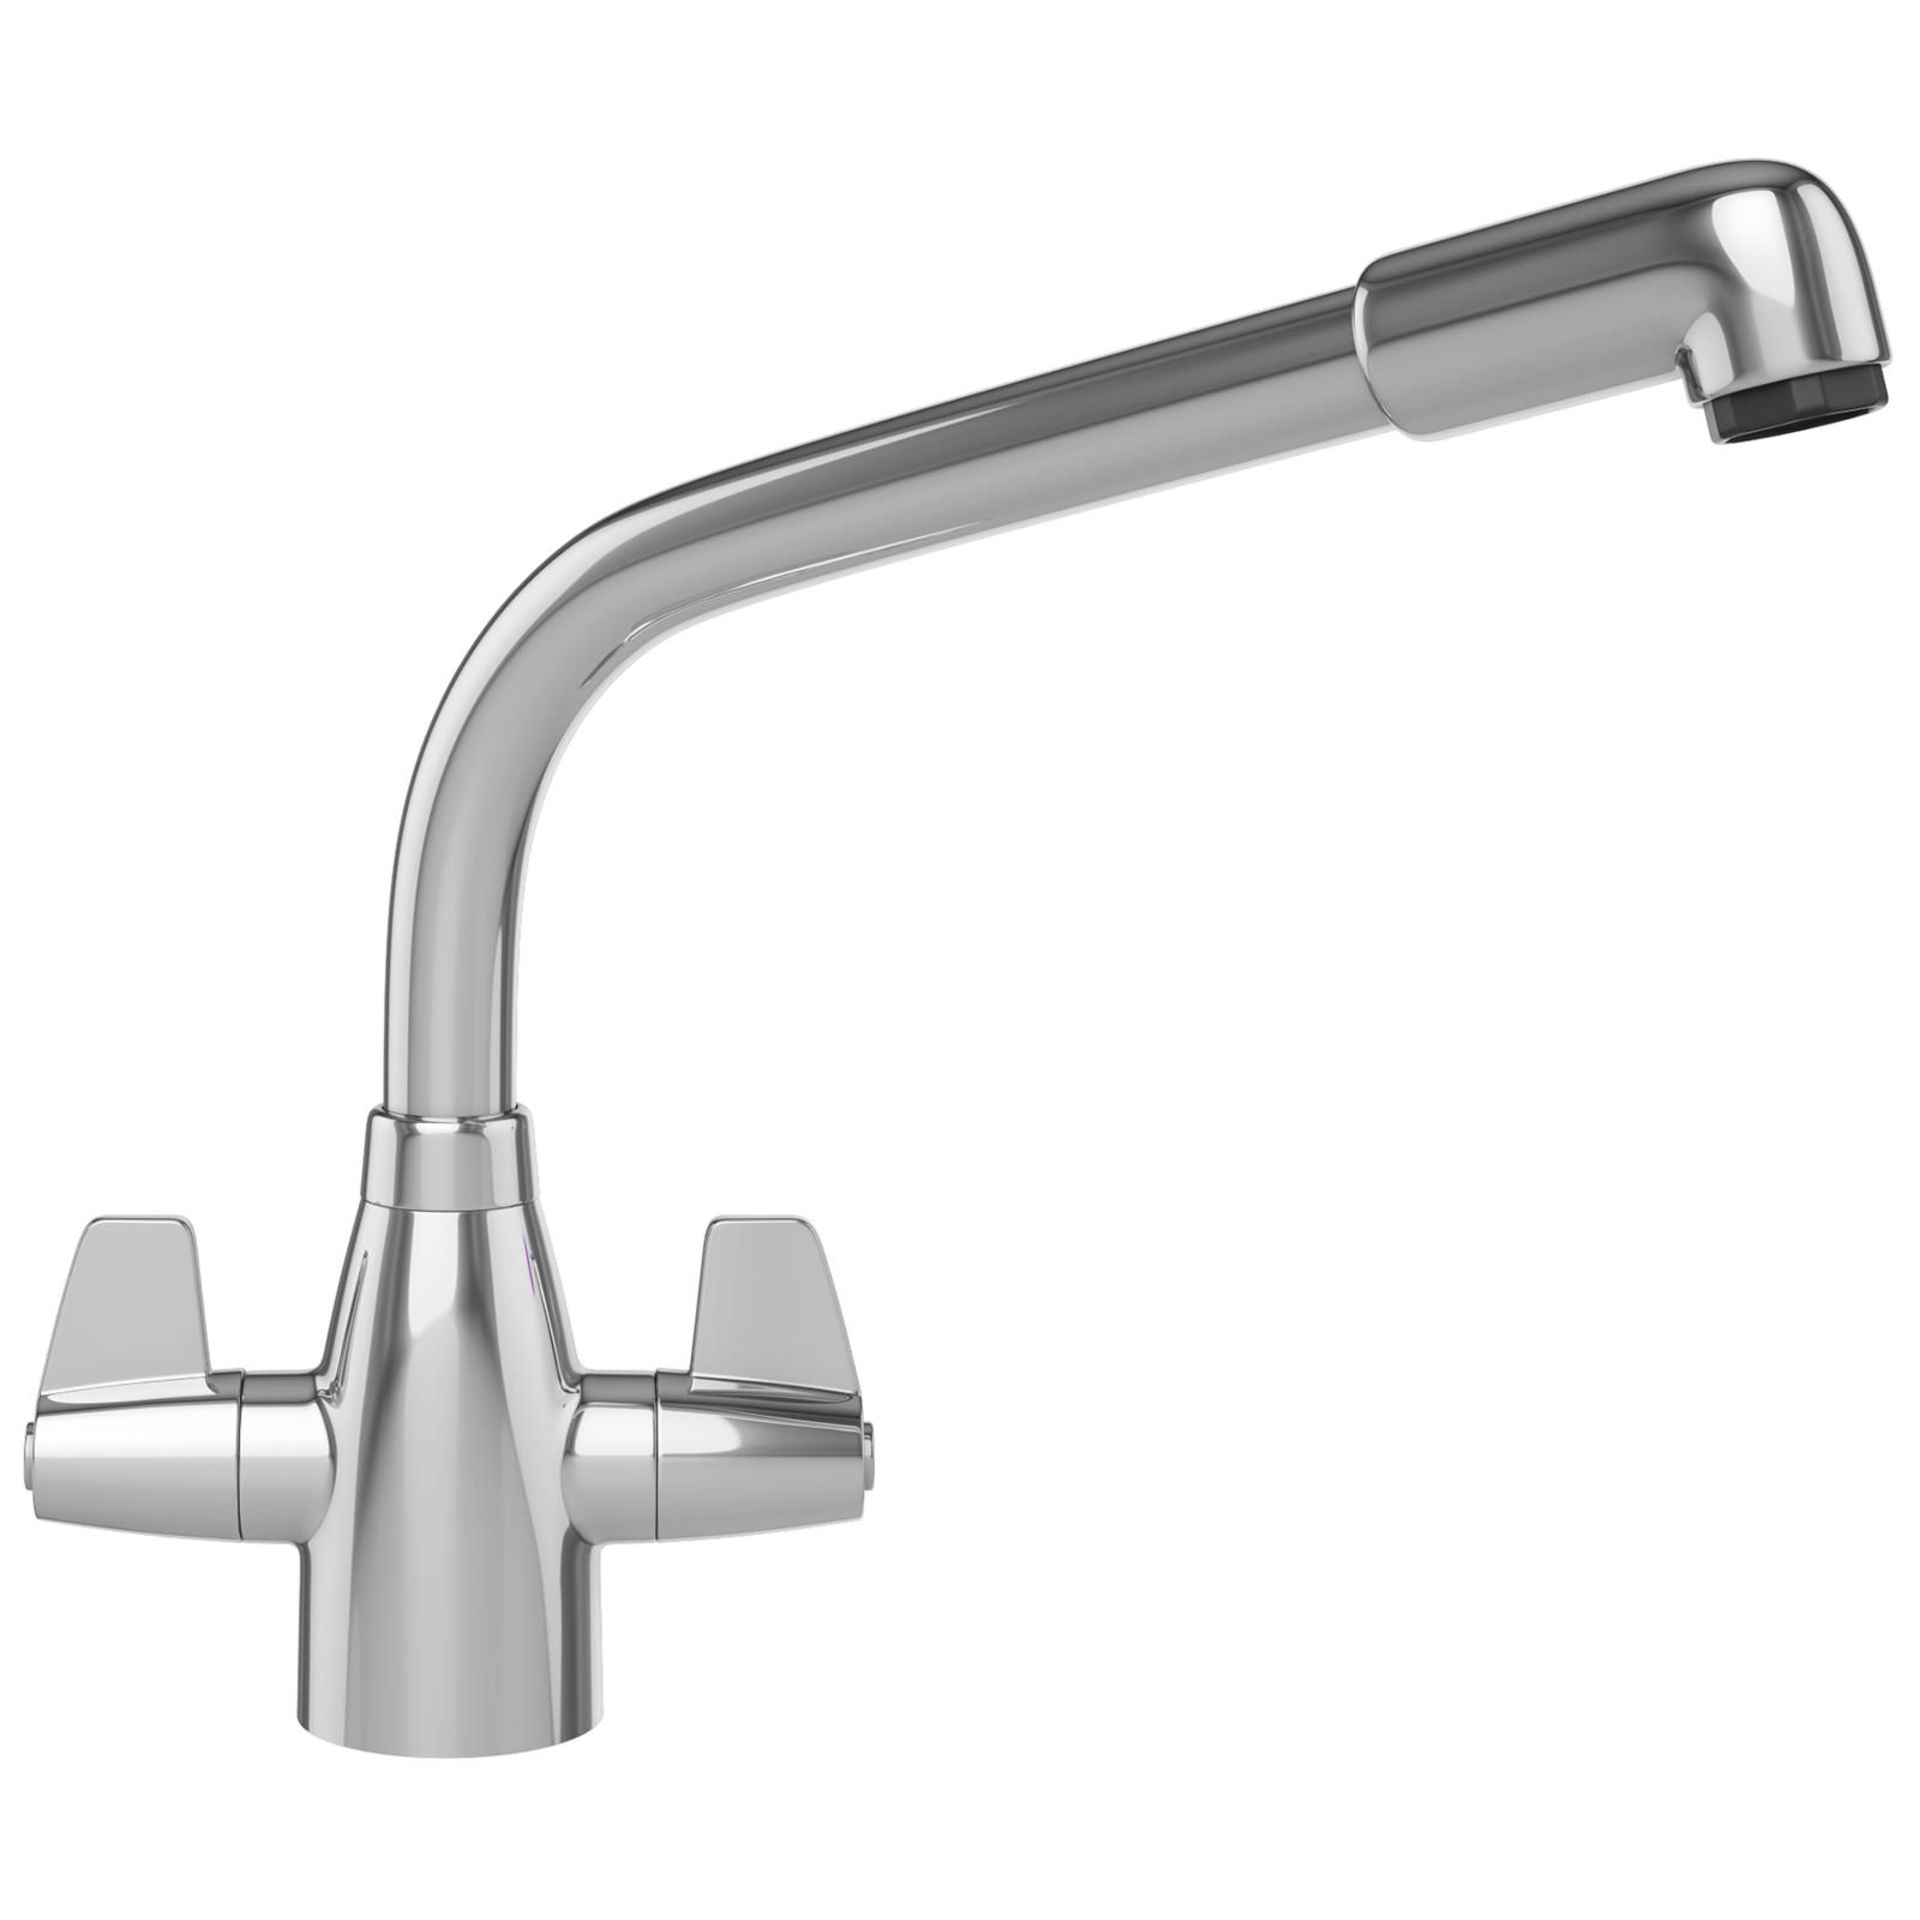 NEW (G53) FRANKE DAVOS KITCHEN TAP CHROME.Polished bi-flow tap Fitted with ceramic disc valve ...